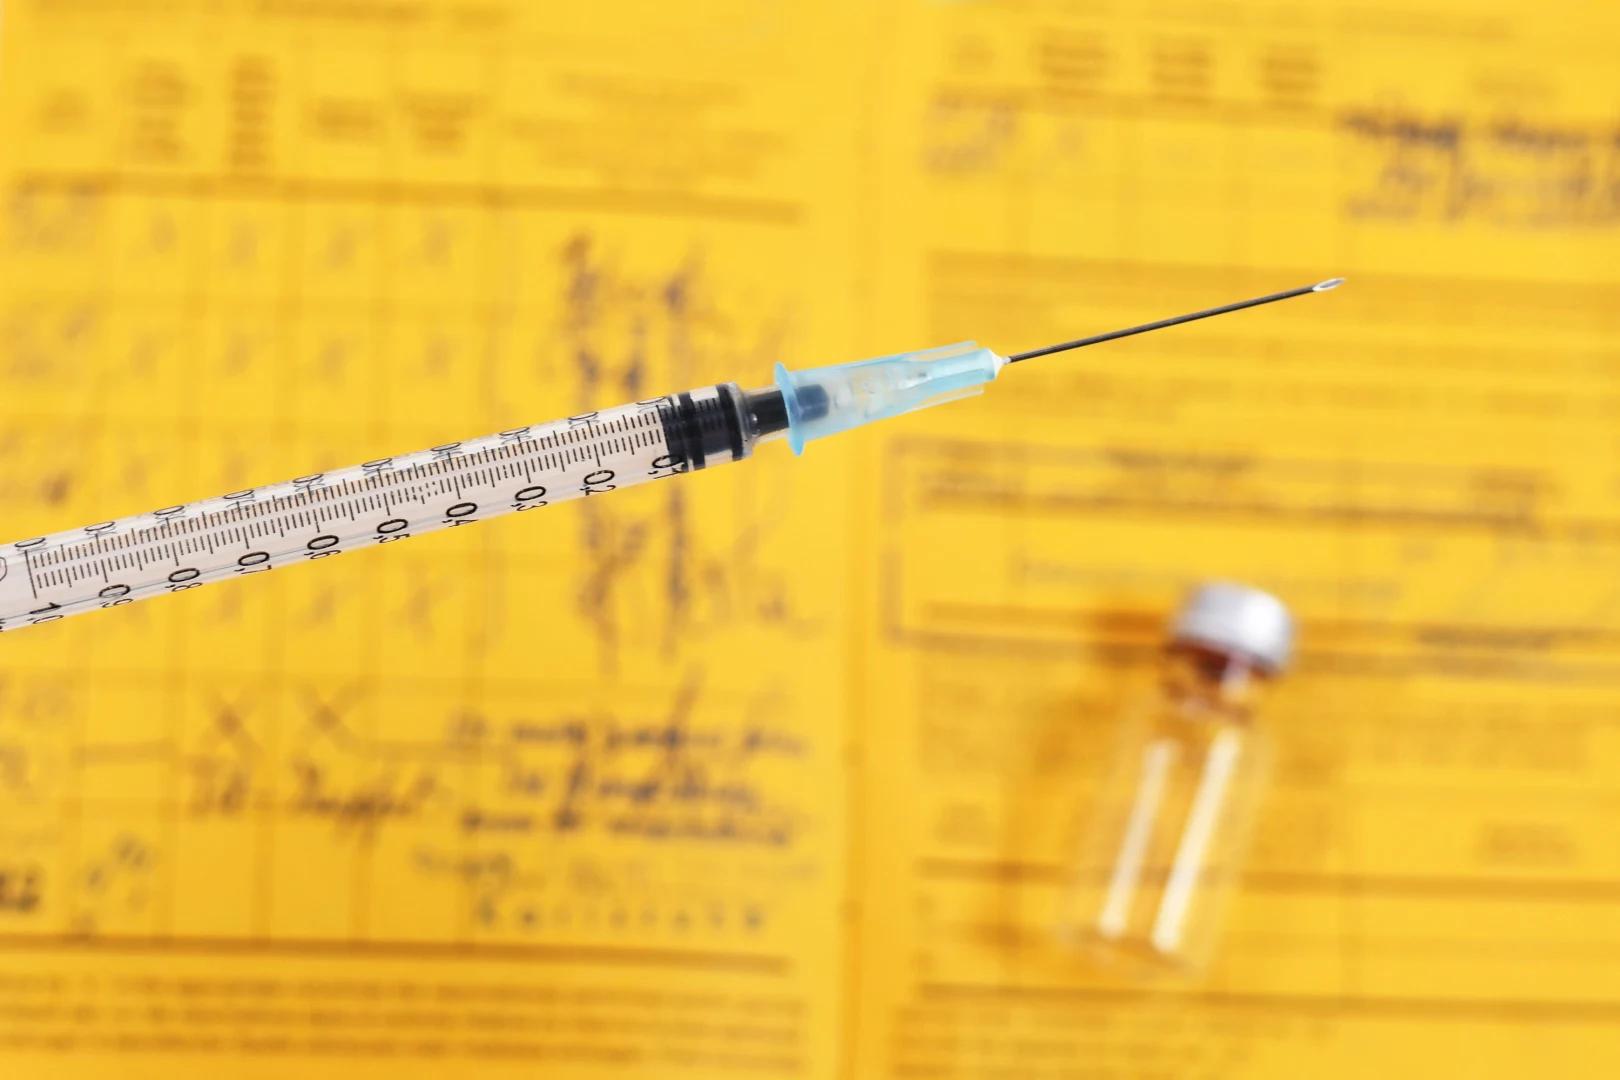 UK: Unequivocal safety signals for heart, blood, and reproduction found in Yellow Card vaccine data, says top scientist